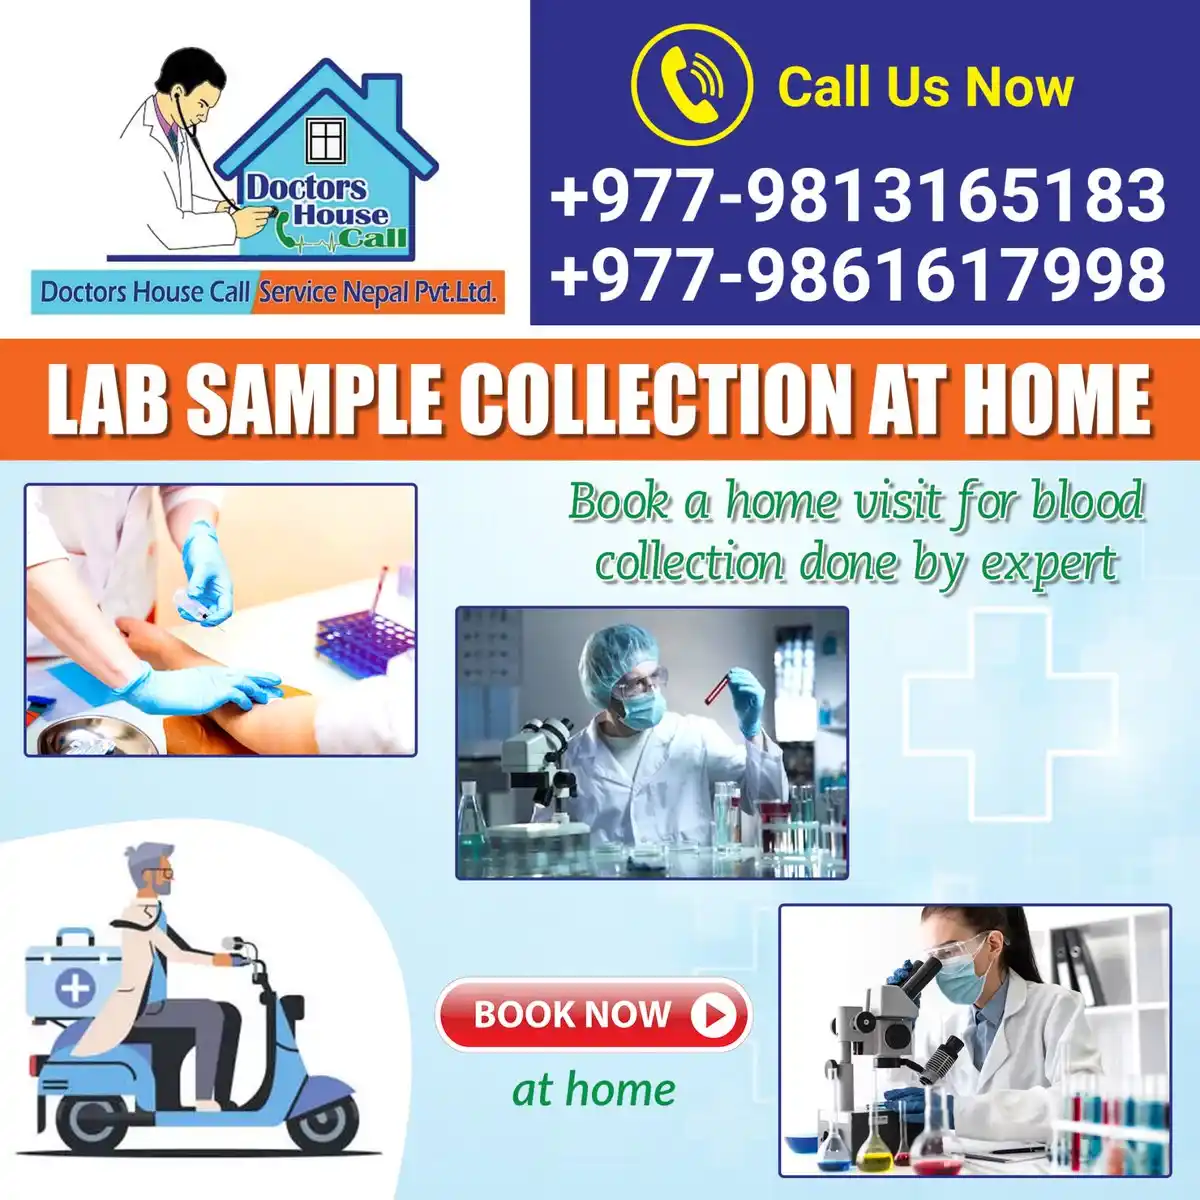 Laboratory Sample Collection In Home Kathmandu, Nepal - Doctors House Call Service